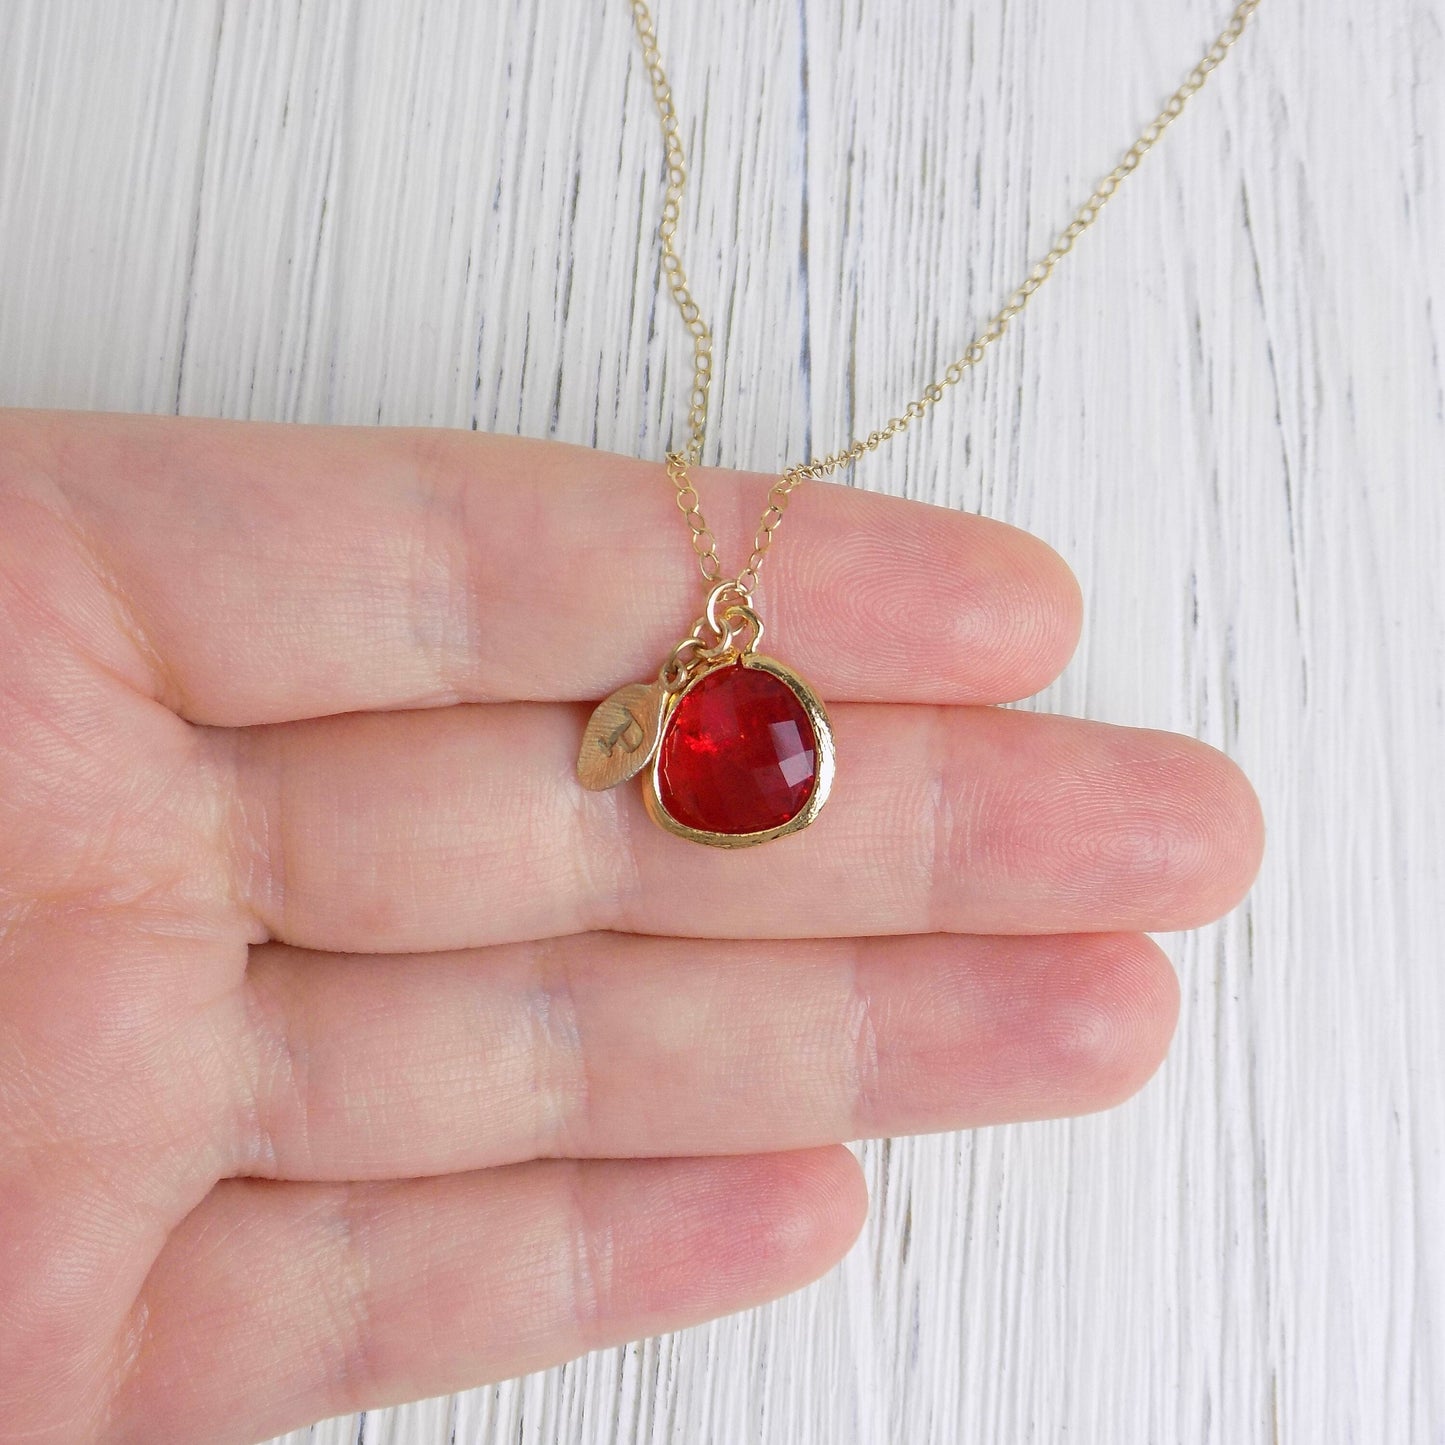 Personalized Red Crystal Quartz Necklace Gold, Custom Gift For Mom, Hand Stamped Initial Charm, M6-702